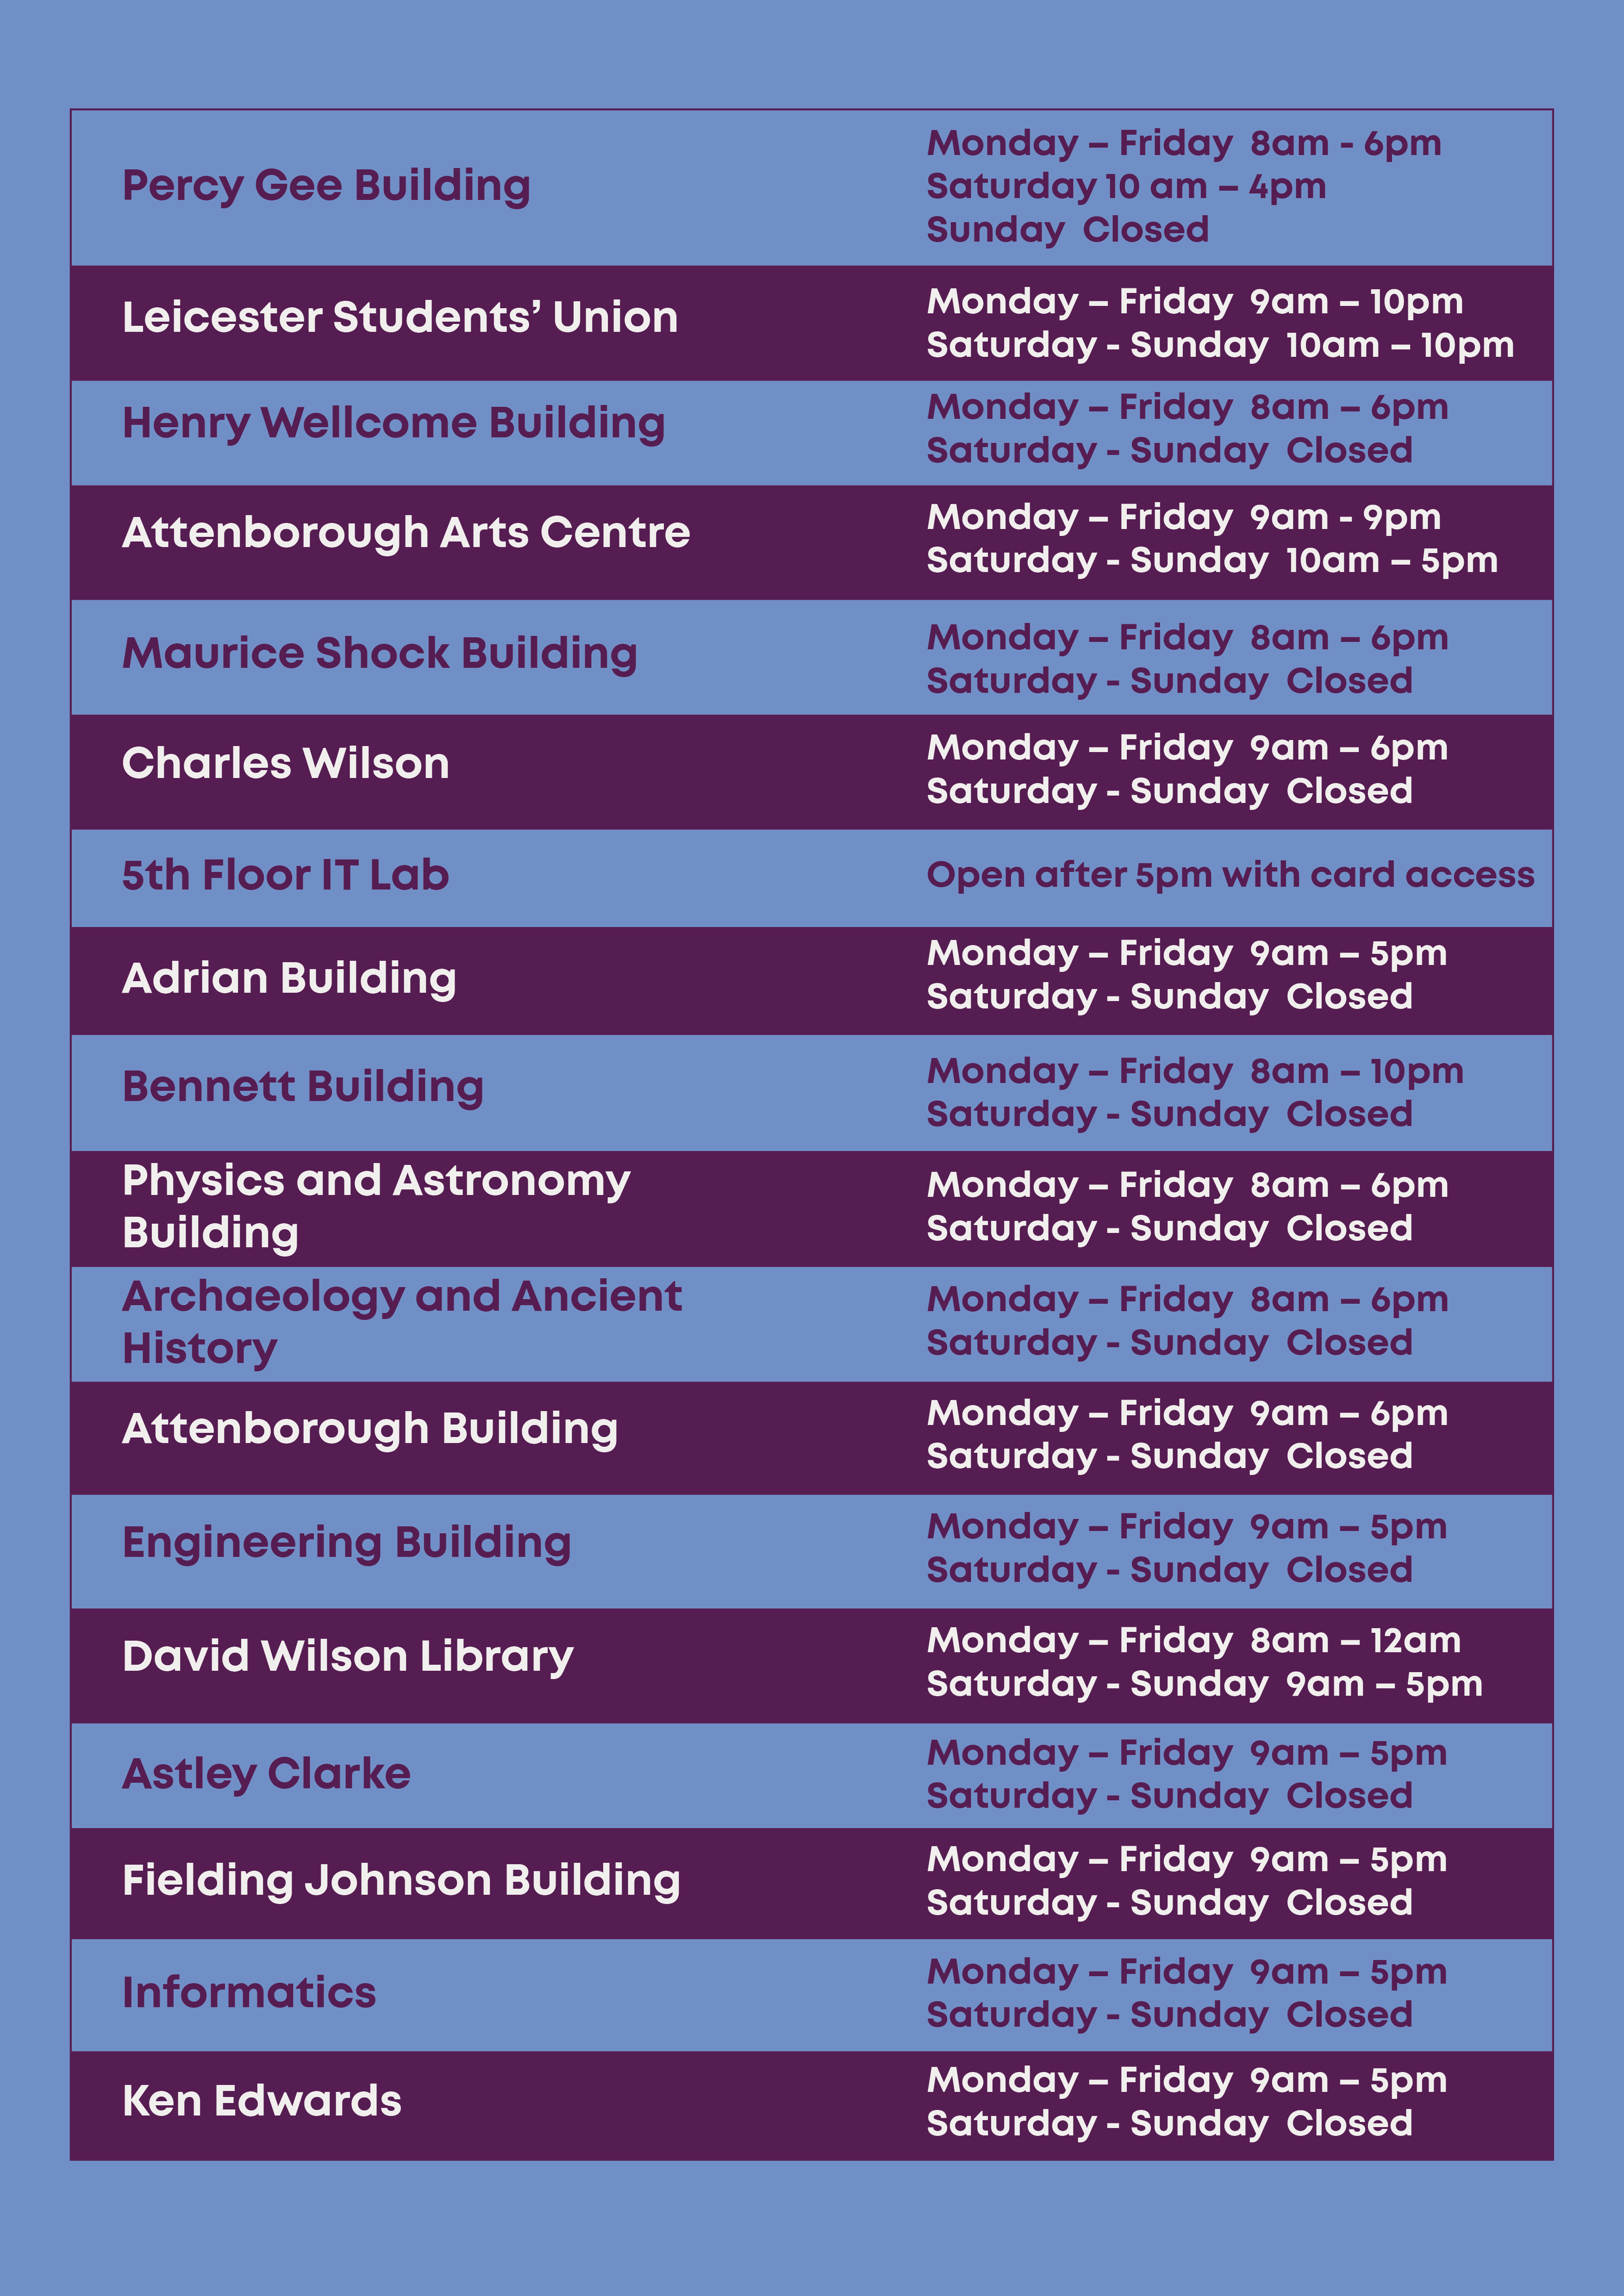 Building hours: o	Percy Gee Building o	Monday – Friday ?	8am - 6pm o	Saturday ?	10 am – 4pm o	Sunday ?	Closed o	Leicester Students’ Union o	Monday – Friday ?	9am – 10pm o	Saturday and Sunday ?	10am – 10pm o	Henry Wellcome Building o	Monday – Friday ?	8am – 6pm o	Saturday and Sunday ?	Closed o	Attenborough Arts Center o	Monday – Friday ?	9am - 9pm o	Saturday and Sunday ?	10am – 5pm o	Maurice Shock Building o	Monday – Friday ?	8am – 6pm o	Saturday and Sunday ?	Closed o	Charles Wilson  o	Monday – Friday ?	9am – 6pm o	Saturday and Sunday ?	Closed o	5th Floor IT Lab o	Open after 5pm with card access o	Adrian Building o	Monday – Friday ?	9am – 5pm o	Saturday and Sunday ?	Closed o	Bennett Building o	Monday – Friday ?	8am – 10pm o	Saturday and Sunday ?	Closed o	Physics and Astronomy Building o	Monday – Friday ?	8am – 6pm o	Saturday and Sunday ?	Closed o	Archaeology and Ancient History o	Monday – Friday ?	9am – 5pm o	Saturday and Sunday ?	Closed o	Attenborough Building o	Monday – Friday ?	9am – 6pm o	Saturday and Sunday ?	Closed o	Engineering Building o	Monday – Friday ?	9am – 5pm o	Saturday and Sunday ?	Closed o	David Wilson Library o	Monday – Friday ?	8am – 12am o	Saturday and Sunday ?	9am – 5pm o	Astley Clarke o	Monday – Friday ?	9am – 5pm o	Saturday and Sunday ?	Closed o	Fielding Johnson Building o	Monday – Friday ?	9am – 5pm o	Saturday and Sunday ?	Closed o	Informatics o	Monday – Friday ?	9am – 5pm o	Saturday and Sunday ?	Closed o	Ken Edwards o	Monday – Friday ?	9am – 5pm o	Saturday and Sunday ?	Closed